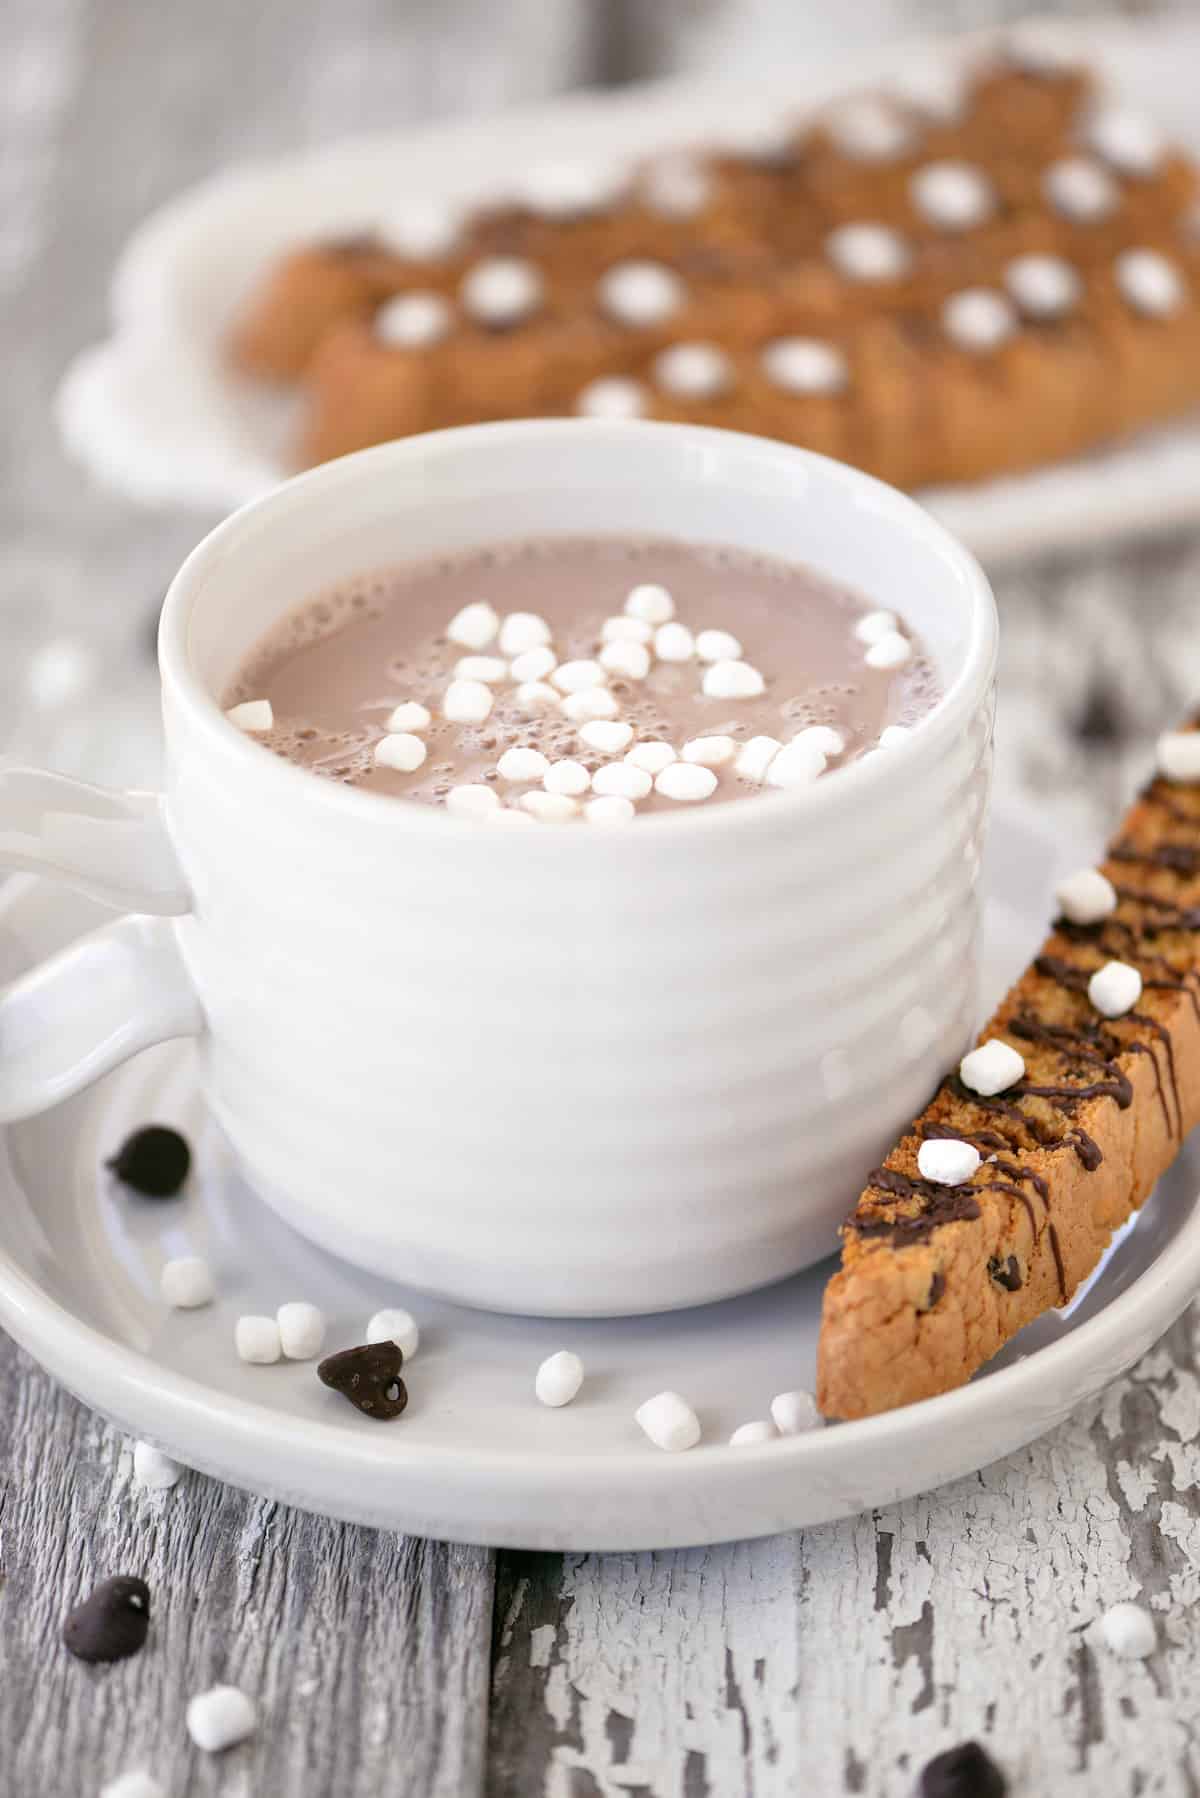 A mug of hot cocoa and a chocolate chip biscotti.